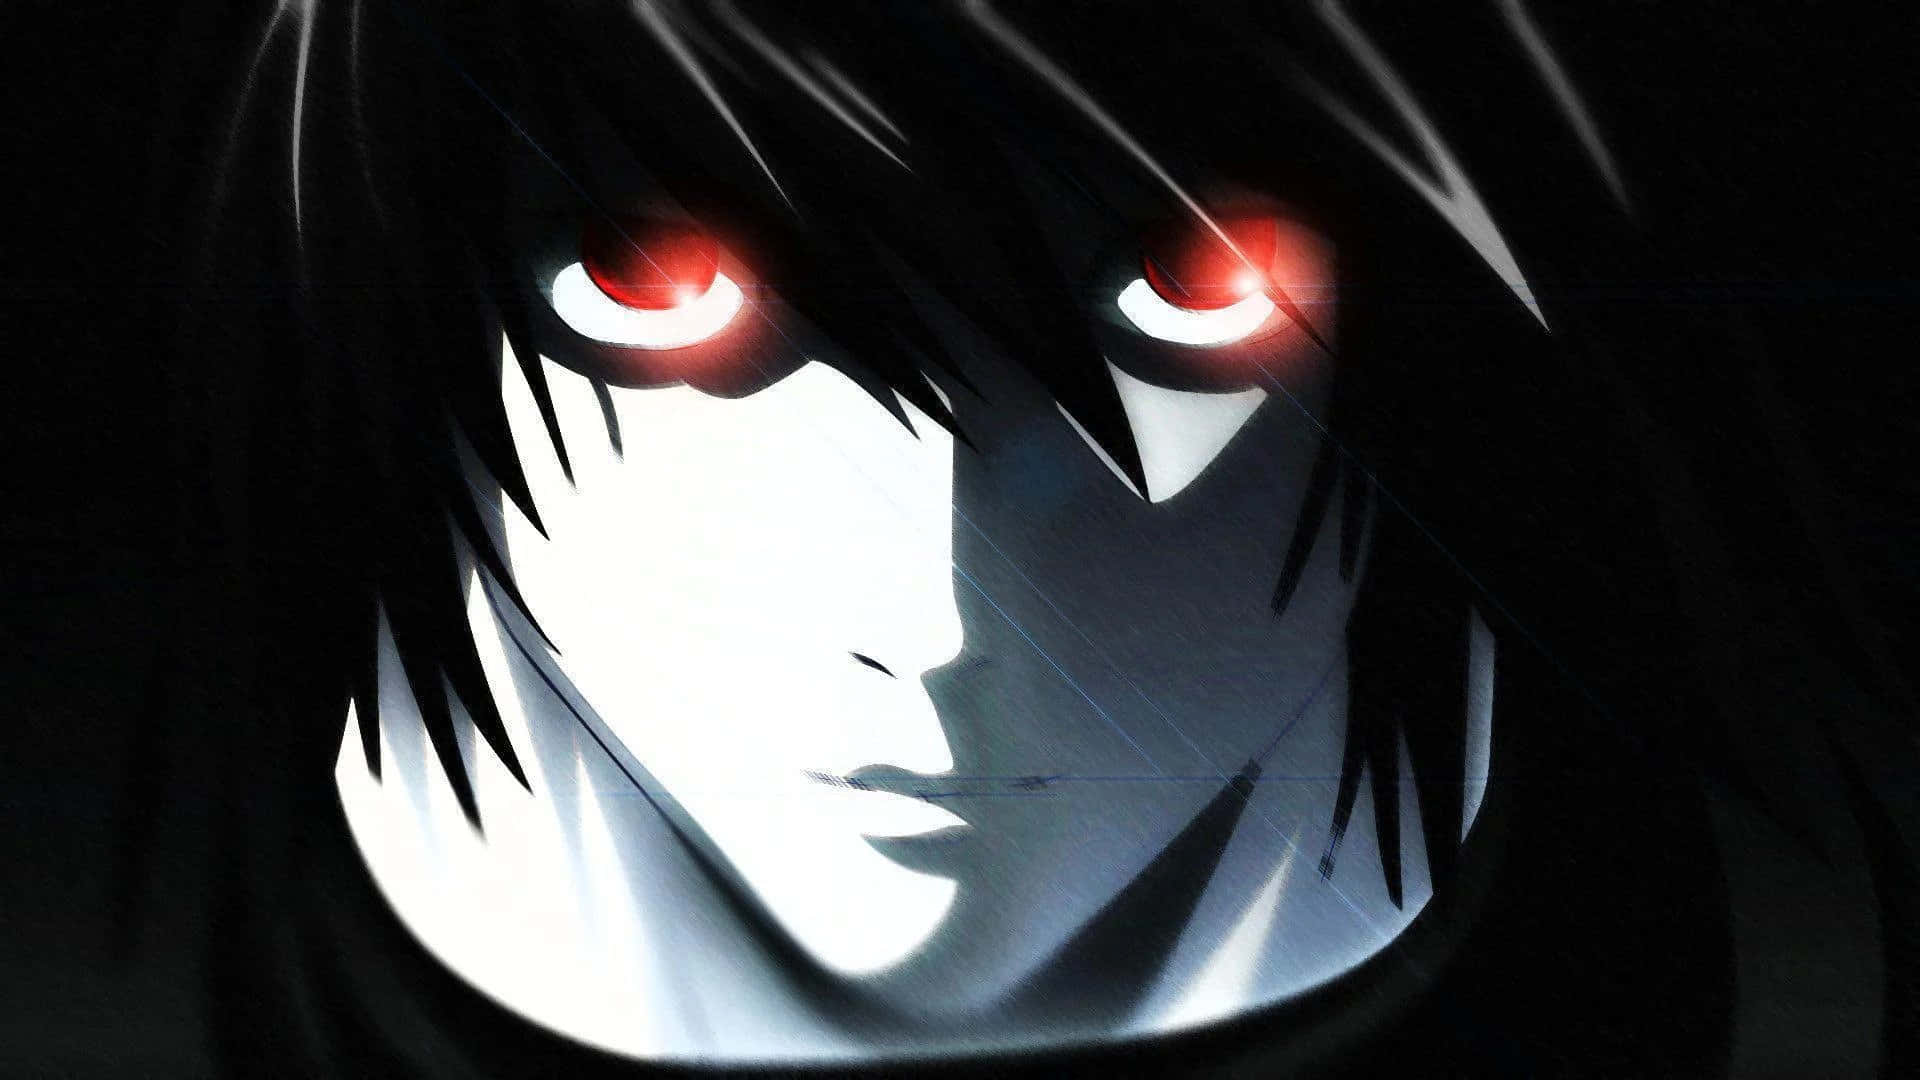 Light Yagami searches for the truth in Death Note